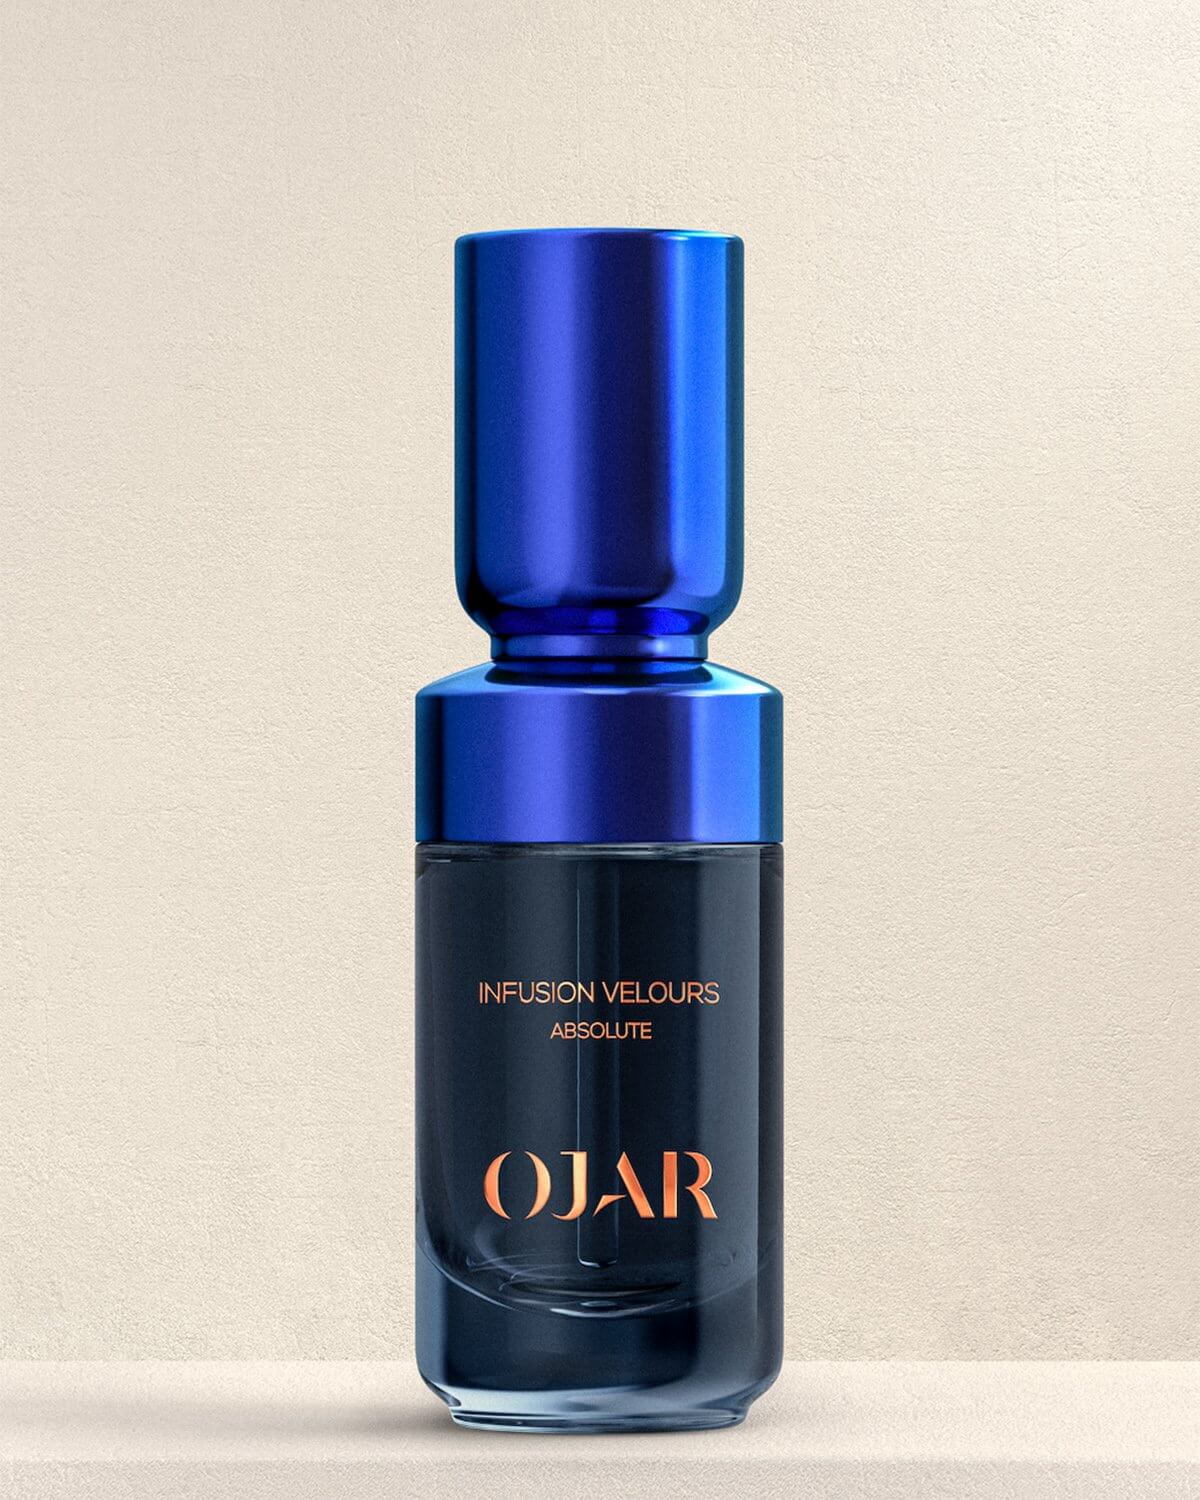 OJAR Absolute Infusion Velours Perfume